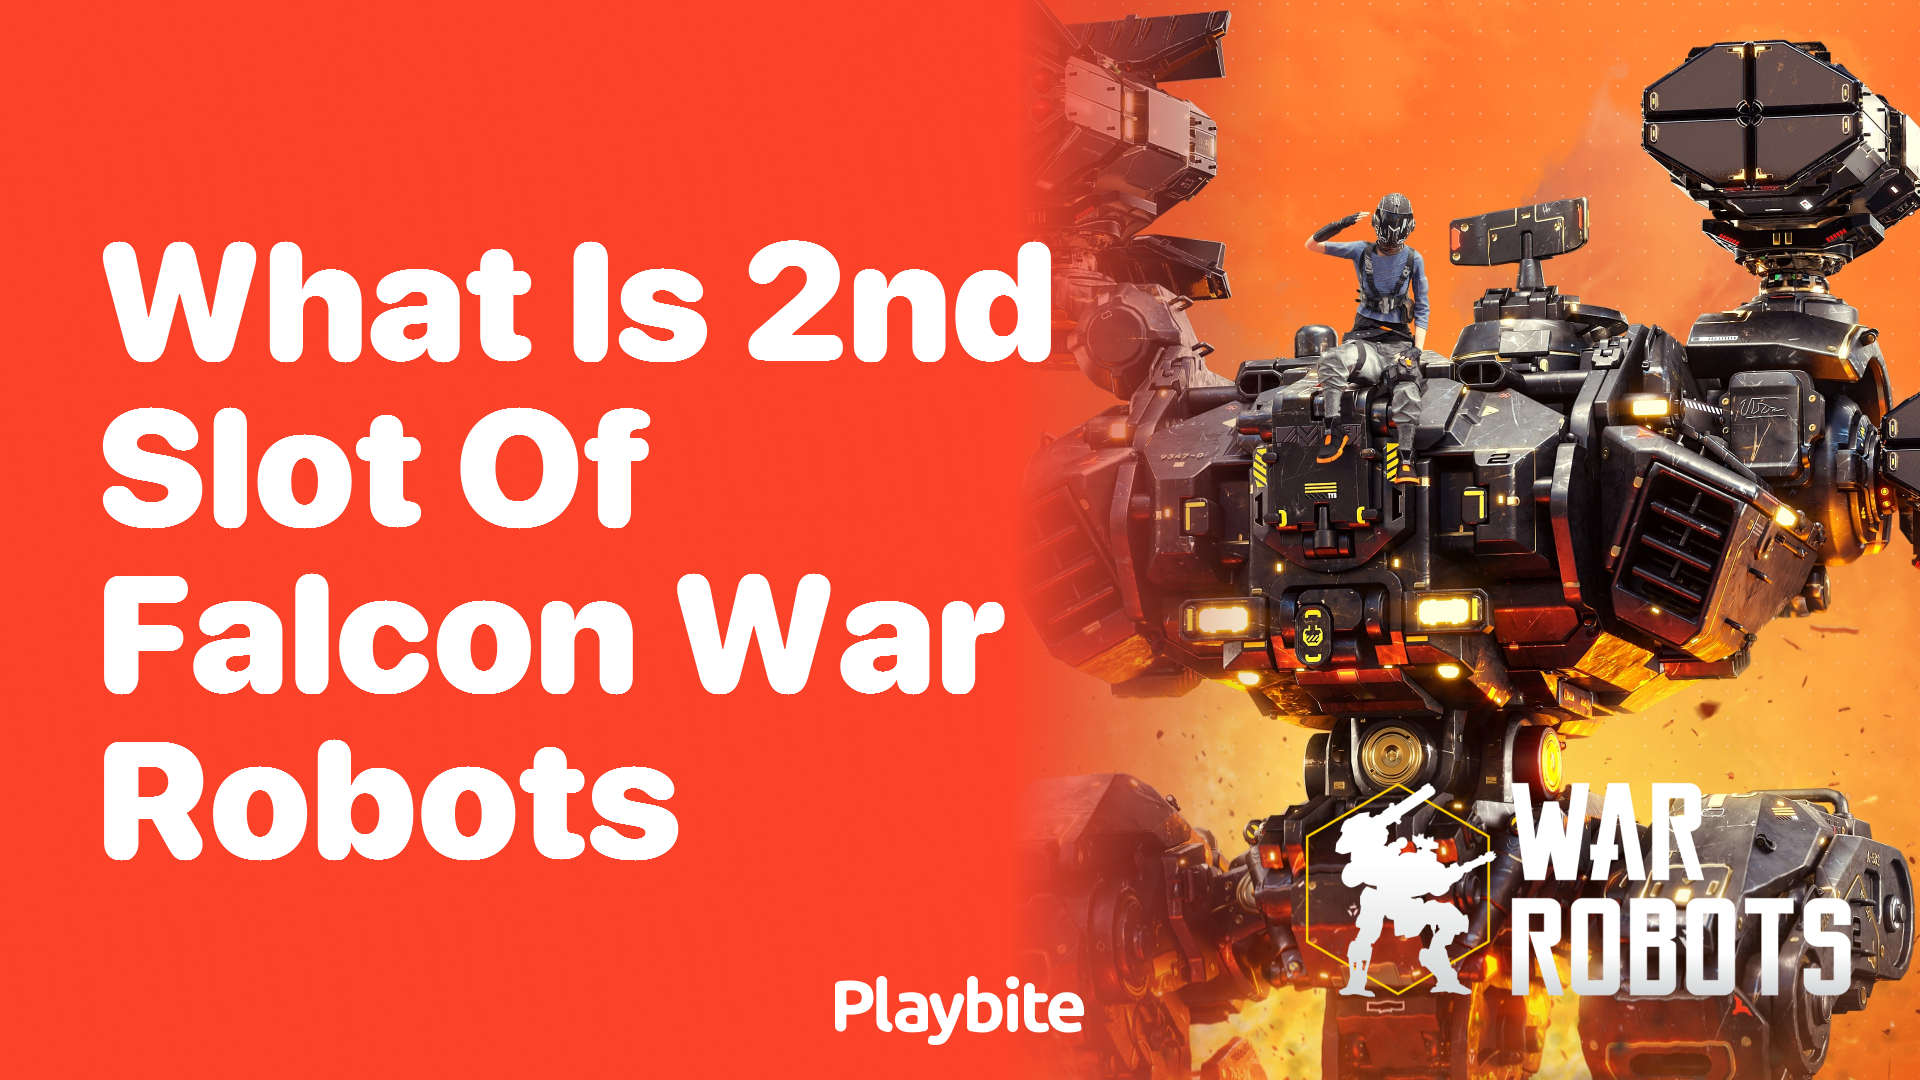 What is the 2nd Slot of Falcon in War Robots?